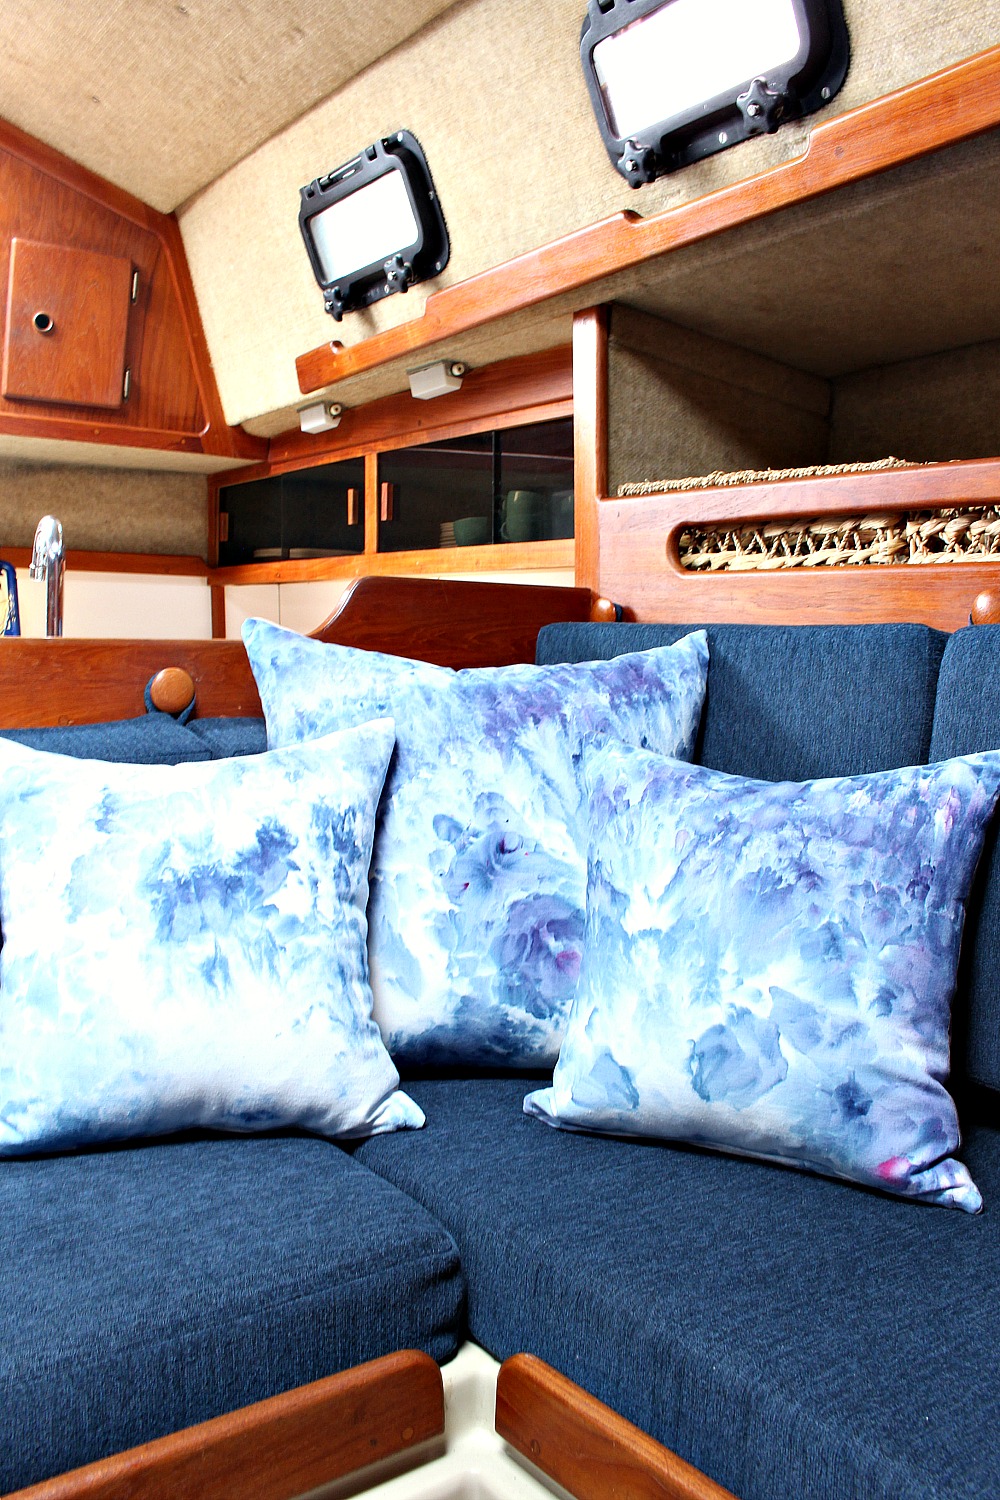 Tour the Before and After of This Updated Ticon 20 Sailboat @danslelakehouse